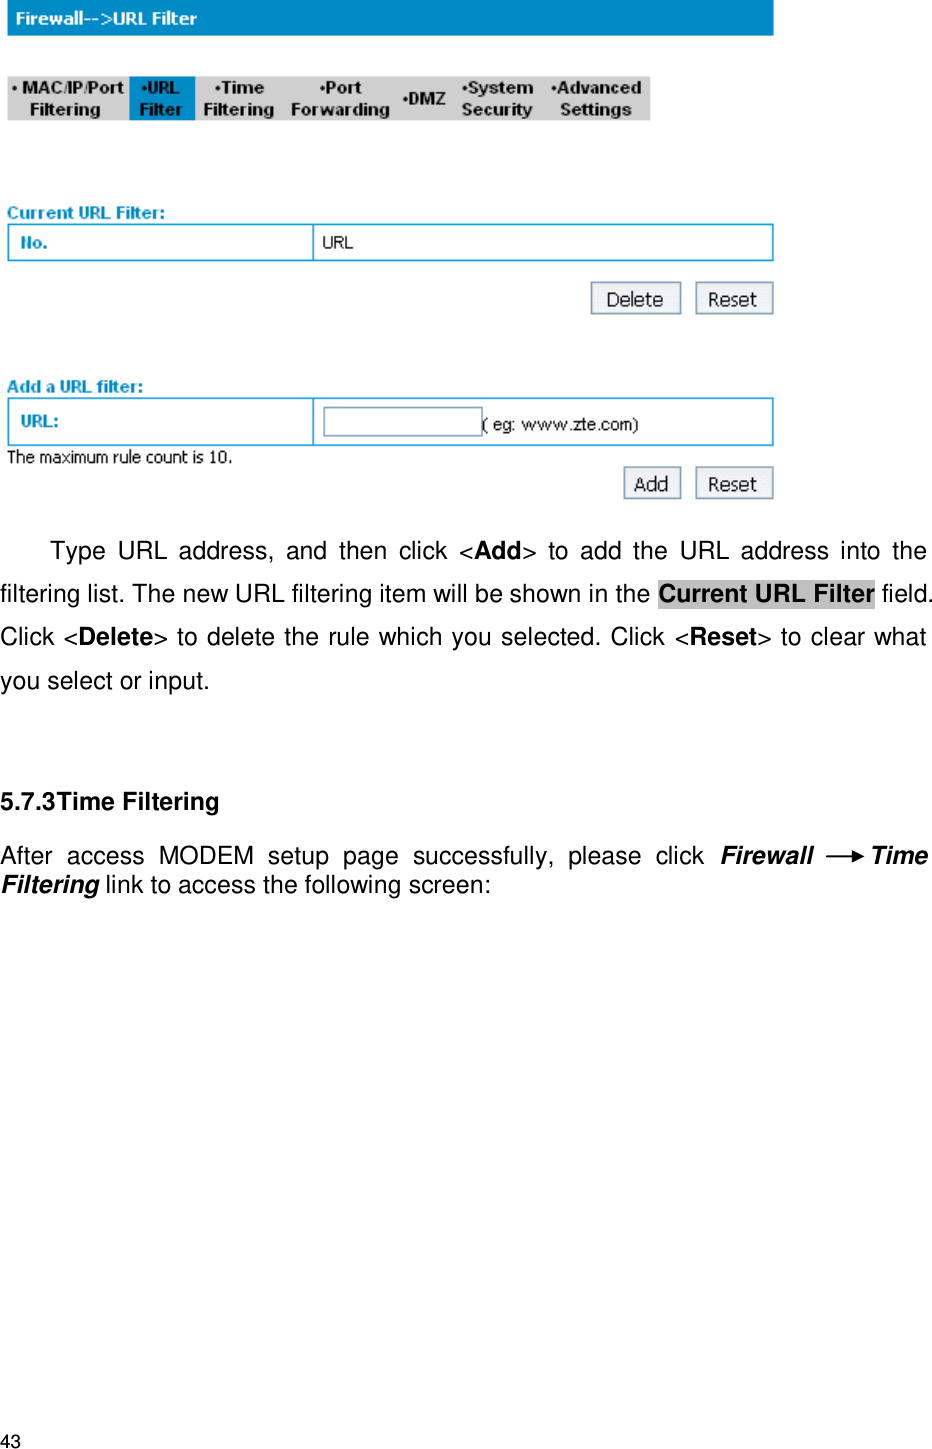 43  Type  URL  address,  and  then  click  &lt;Add&gt;  to  add  the  URL  address  into  the filtering list. The new URL filtering item will be shown in the Current URL Filter field. Click &lt;Delete&gt; to delete the rule which you selected. Click &lt;Reset&gt; to clear what you select or input.  5.7.3 Time Filtering After  access  MODEM  setup  page  successfully,  please  click  Firewall  Time Filtering link to access the following screen: 